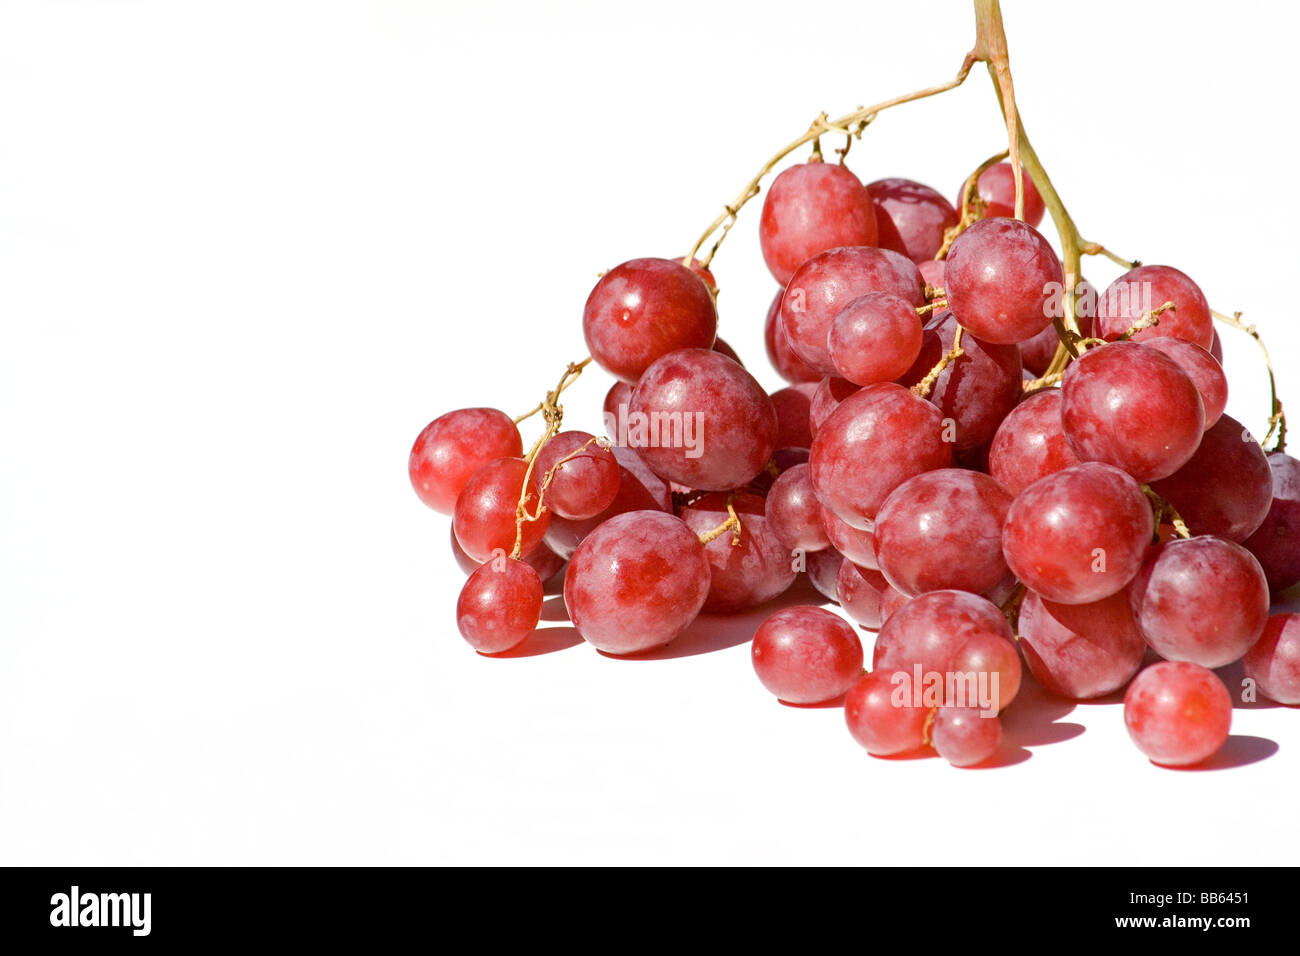 Red grapes on white background Stock Photo